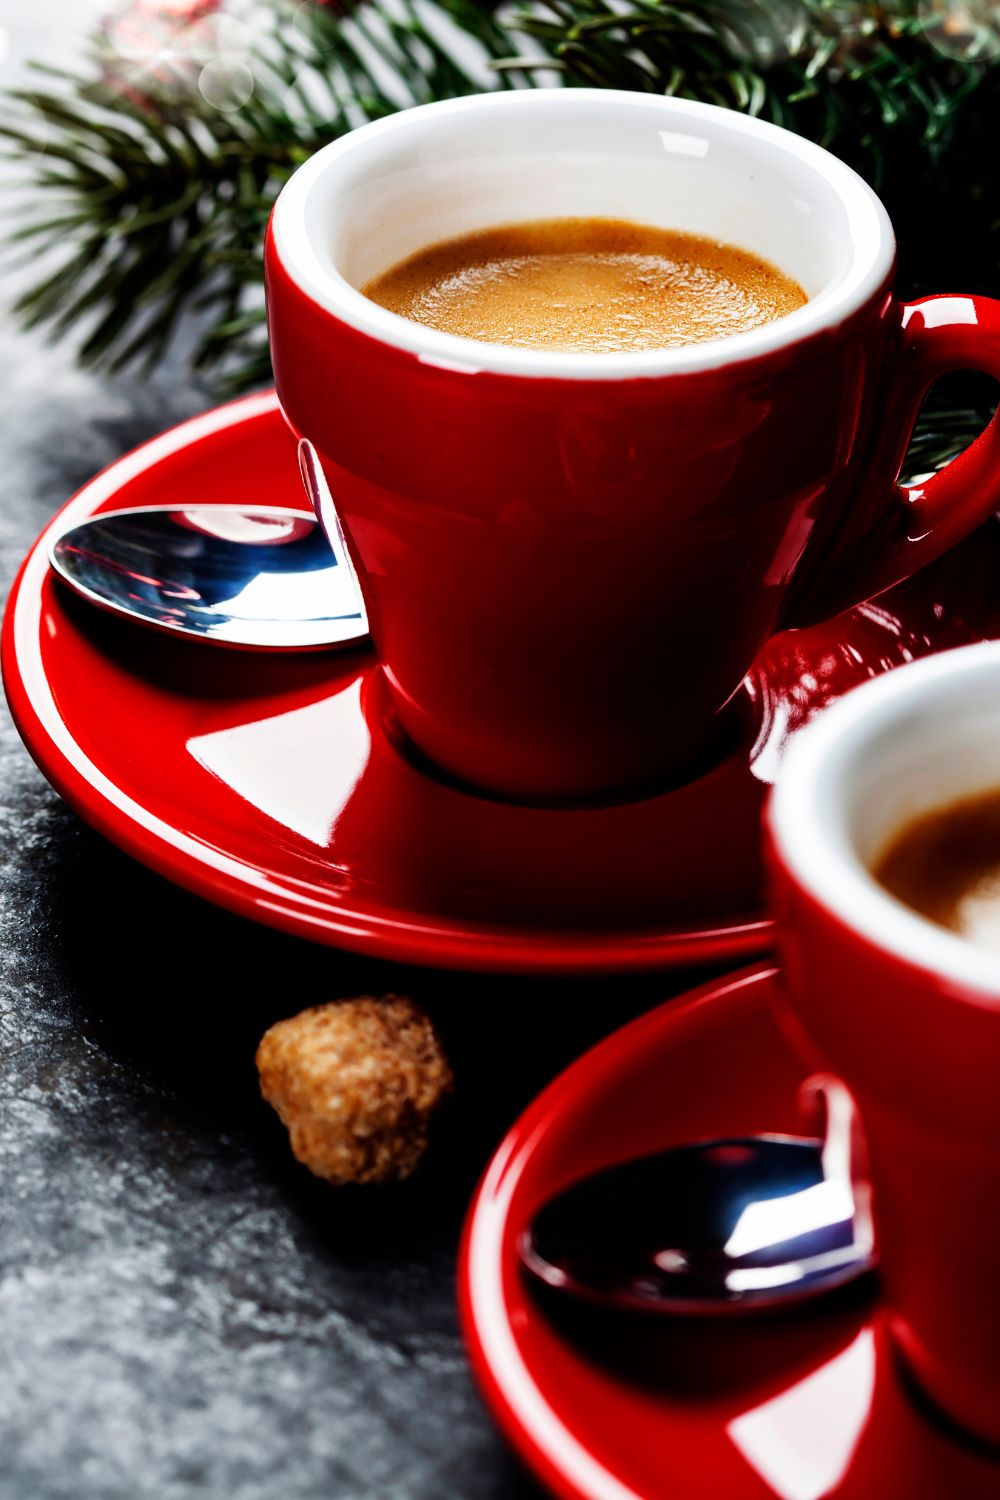 a cup of coffee in red mugs with Christmas wreath